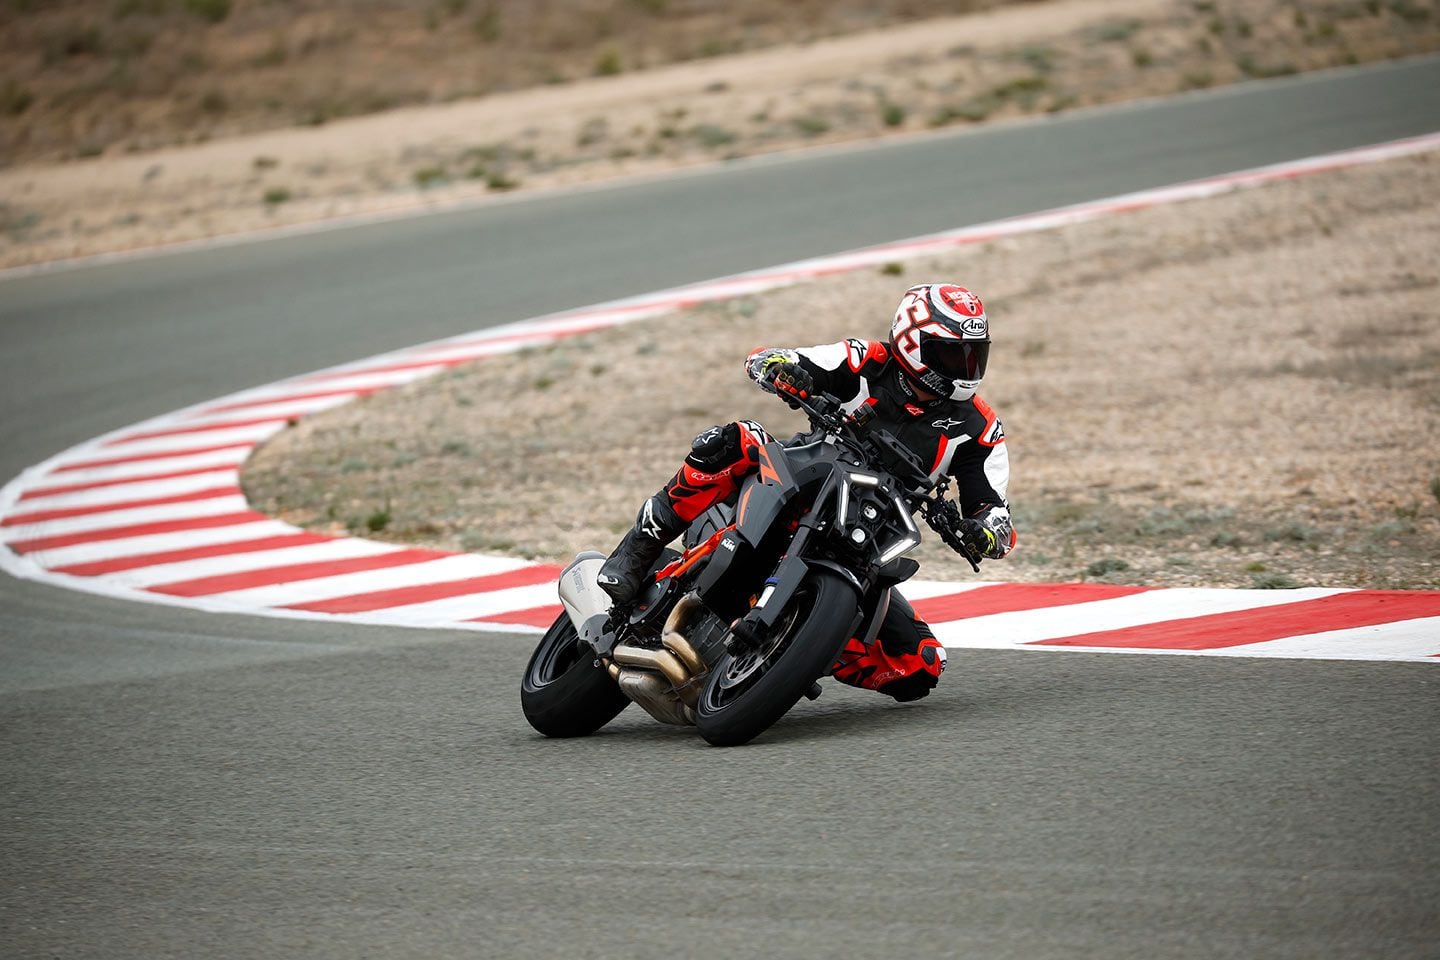 KTM doesn’t have a full-fairing sportbike in its lineup, making the 1390 Super Duke R the go-to option if you want to experience that big LC8 twin at the track. Lots of testing, with legendary rider Jeremy McWilliams, has led to a bike that doesn’t feel out of place banked into a corner.